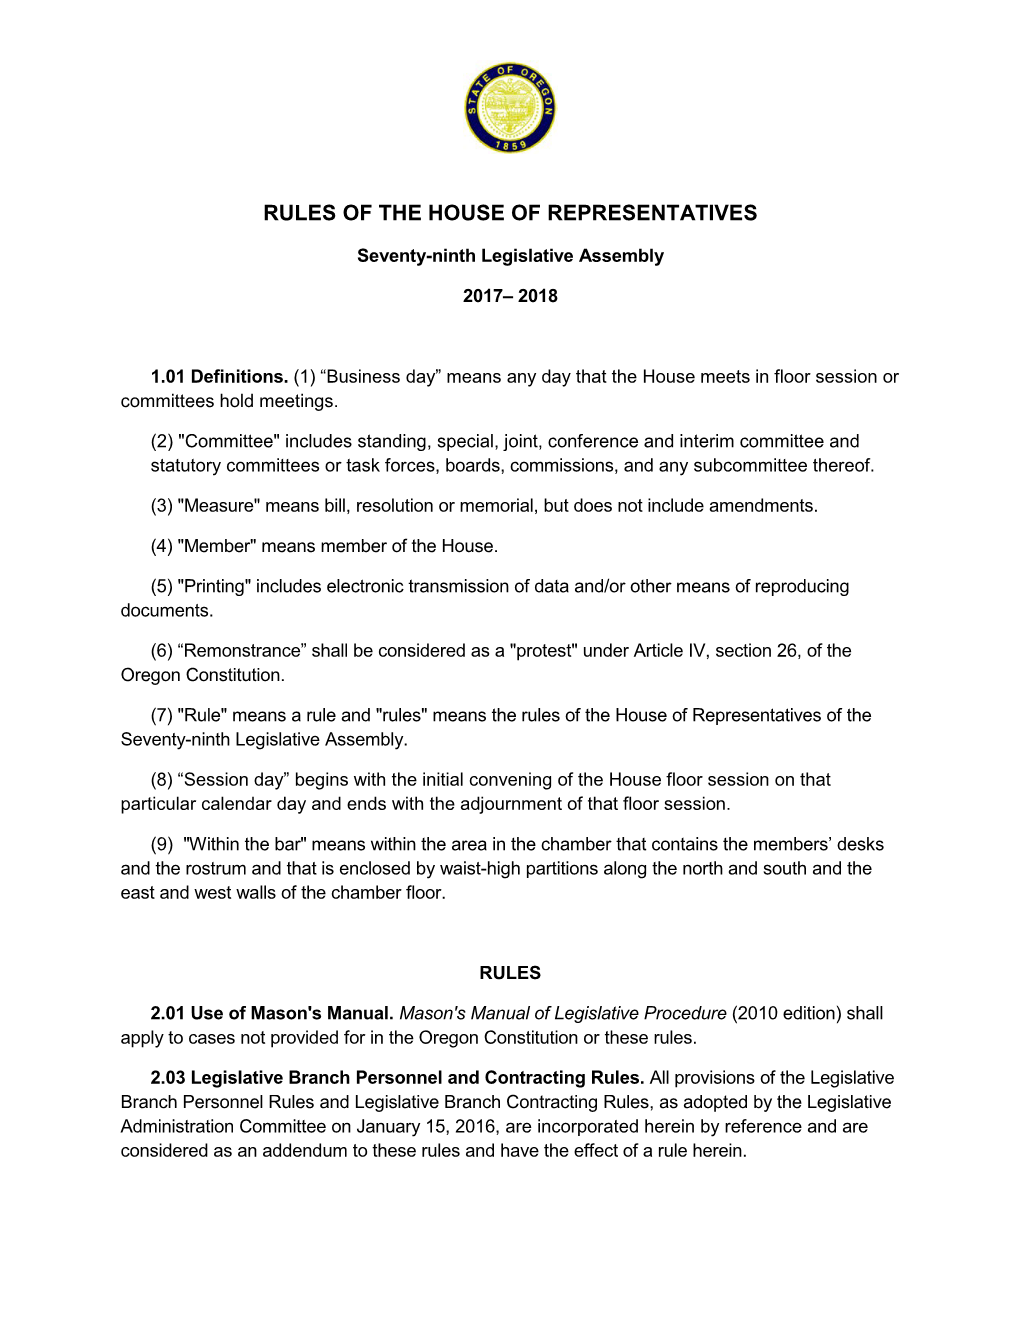 Rules of the House of Representatives